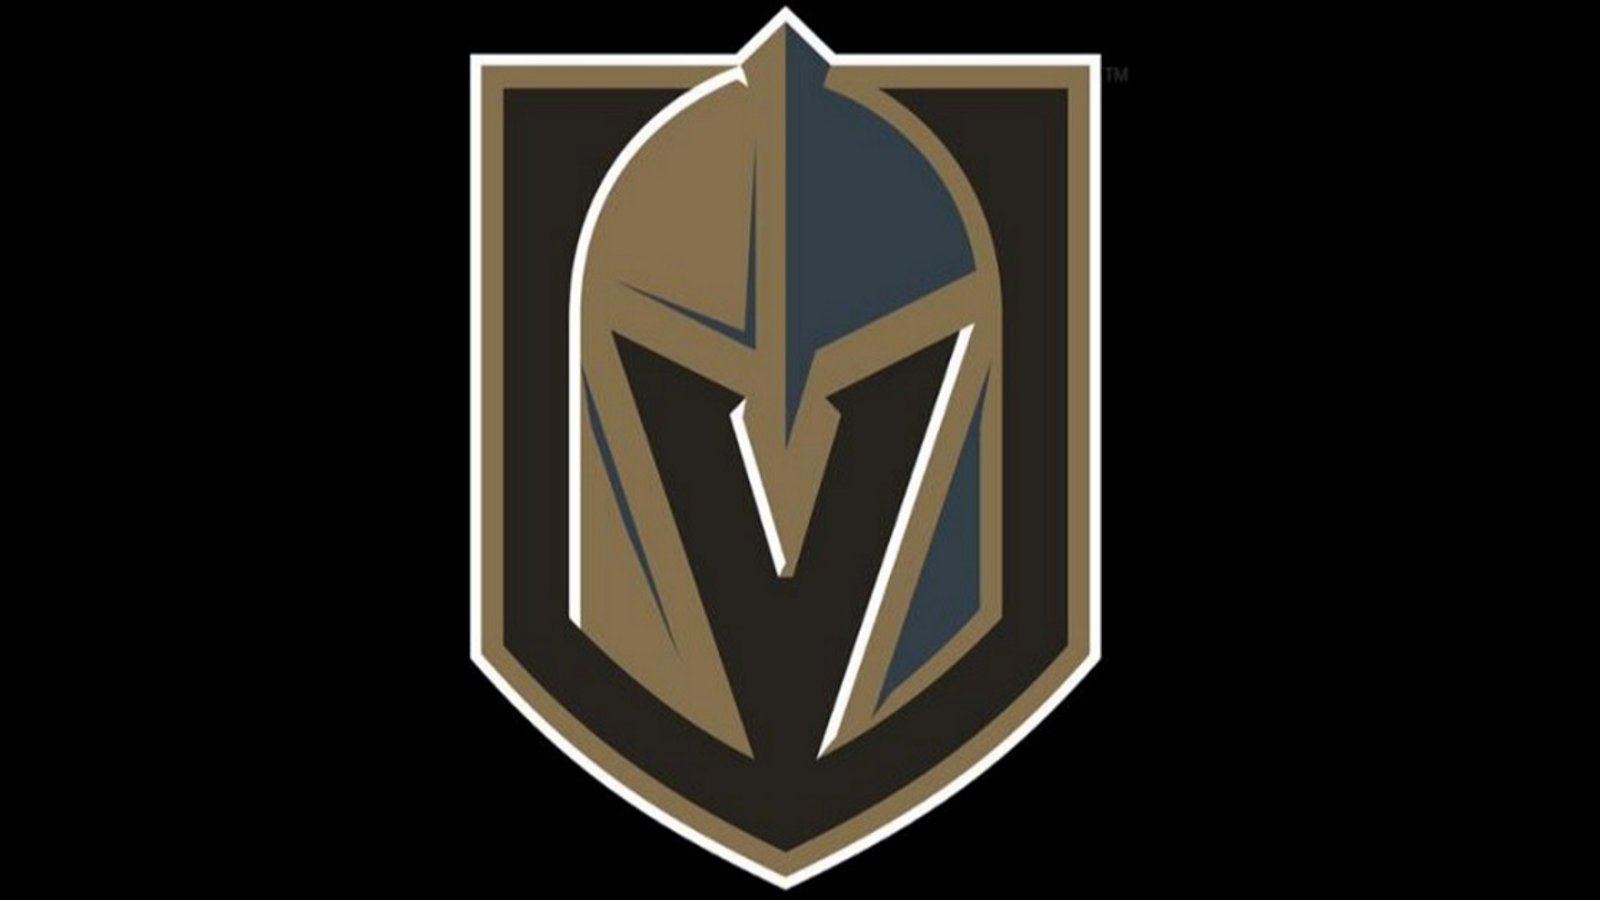 Five names emerge as candidates to be the first head coach of the Golden Knights.